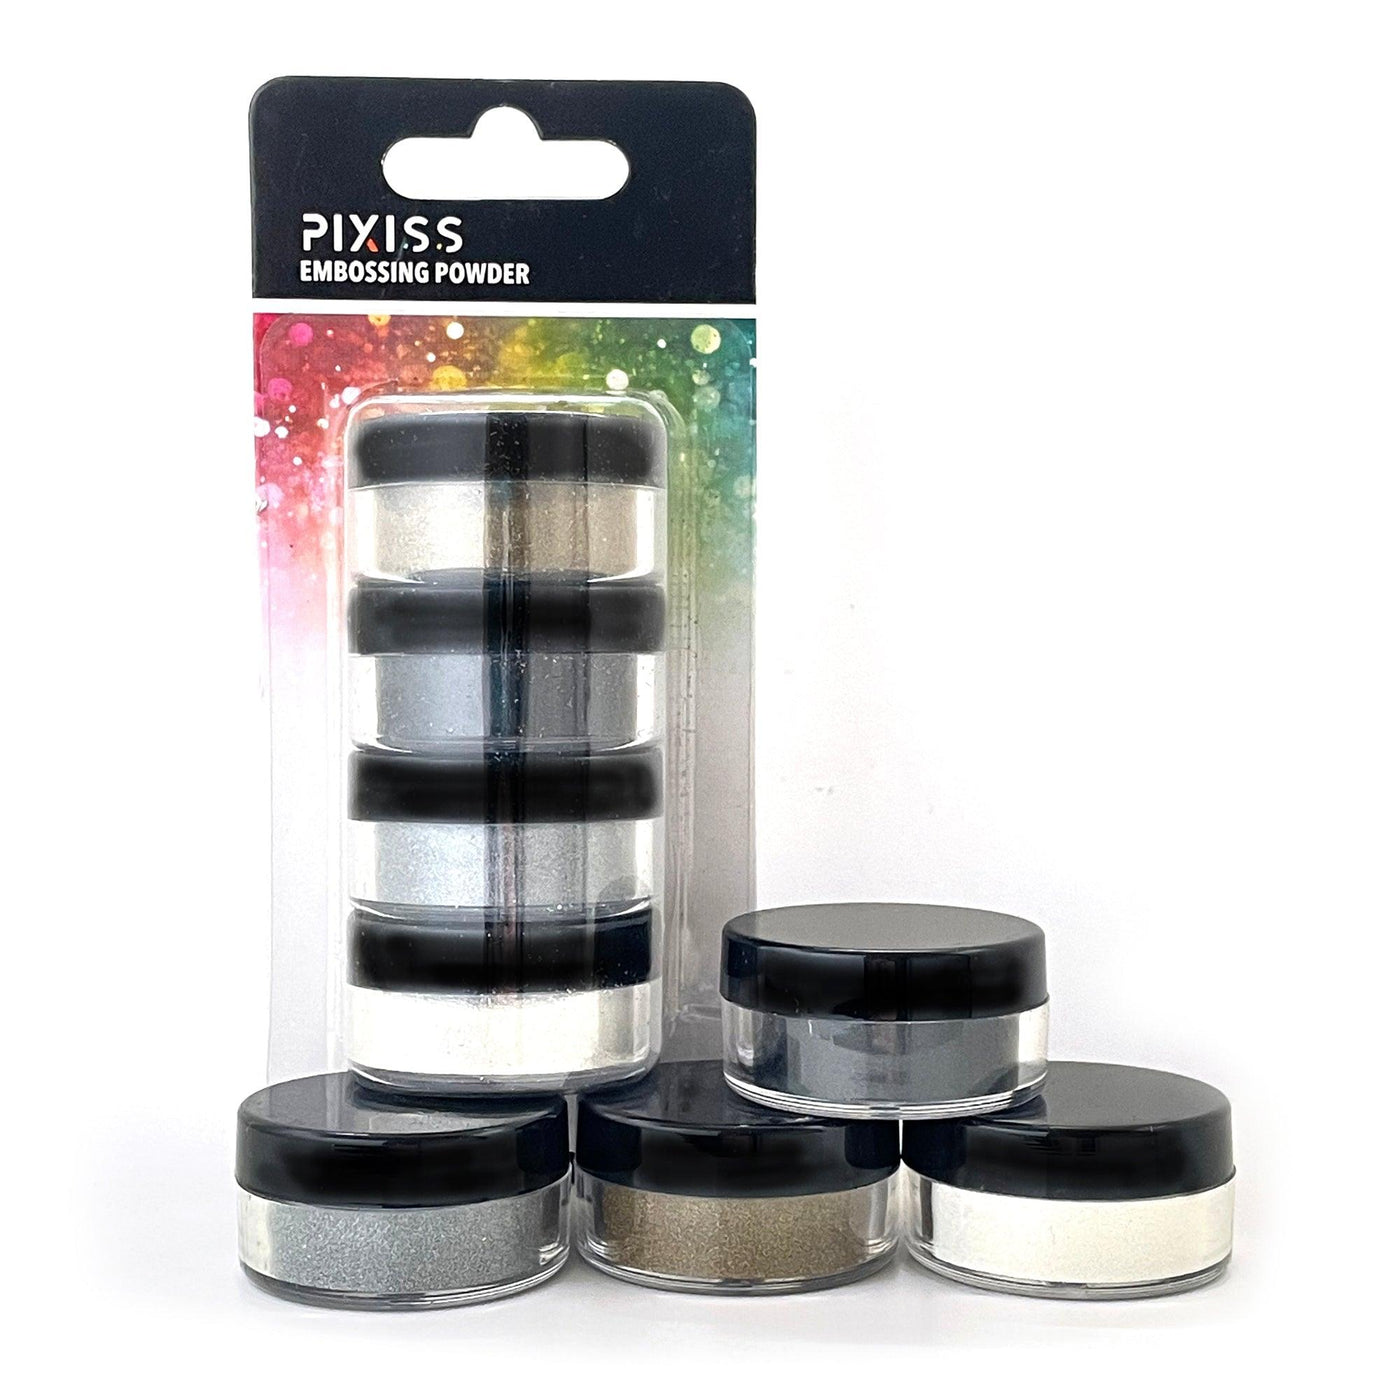 PIXISS Embossing Powders Set of 4 Colors by Pixiss - Vysn